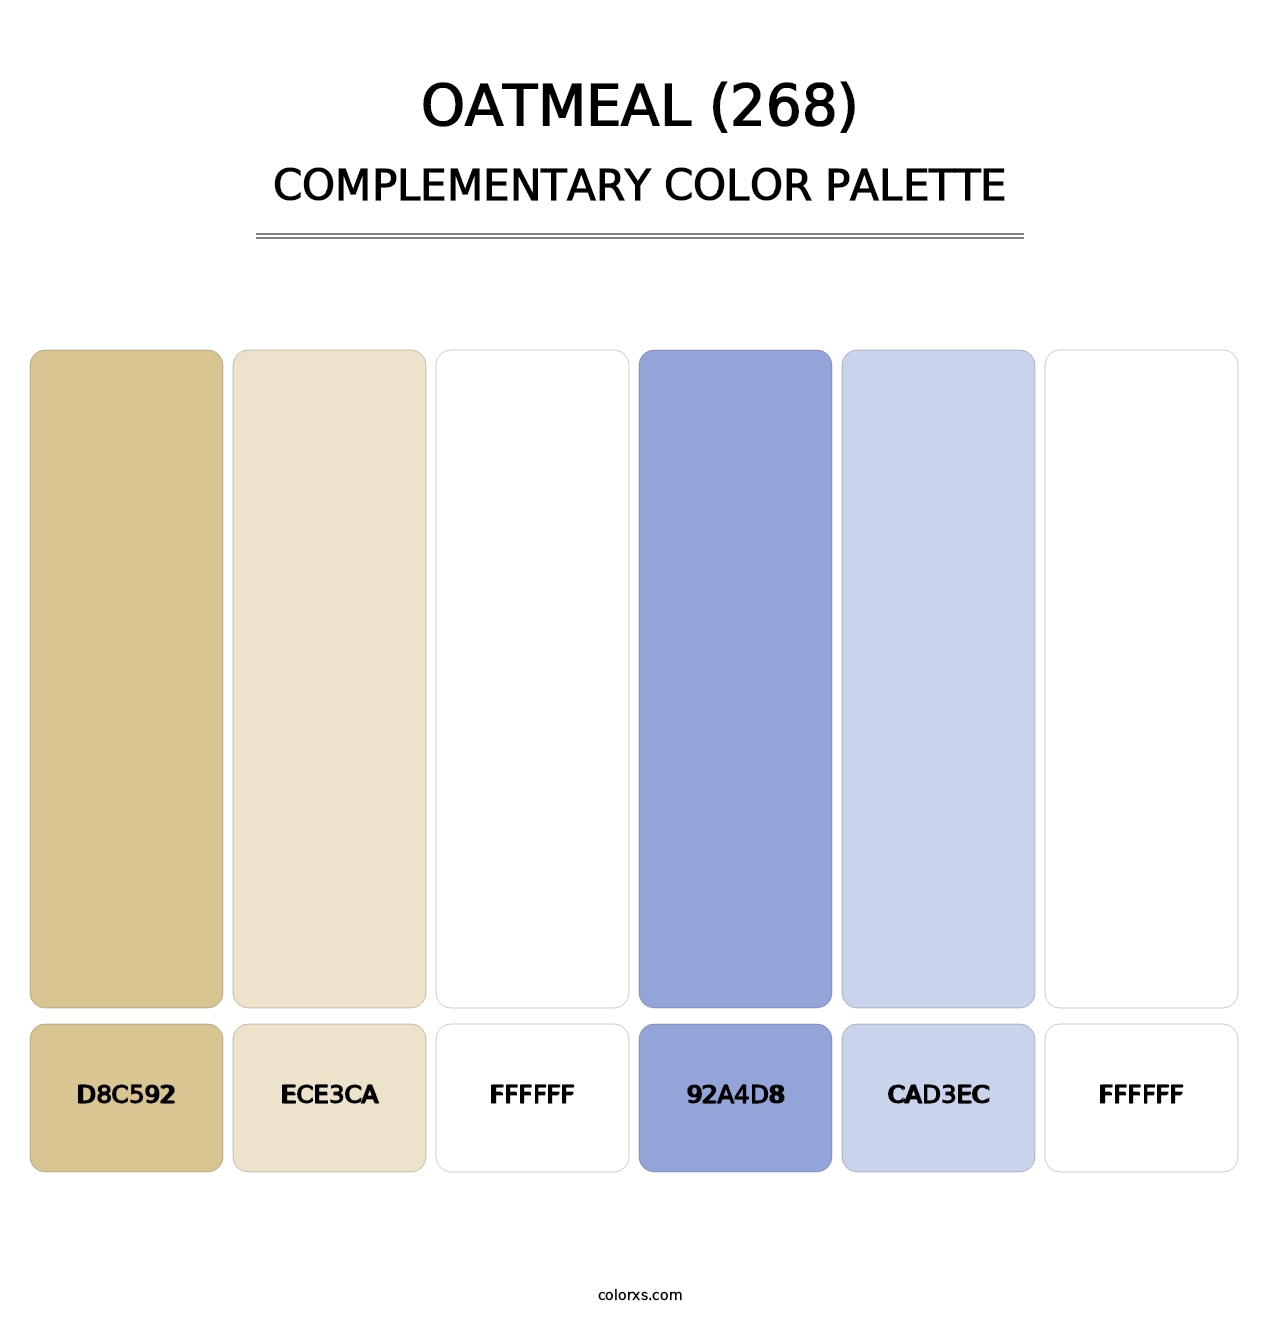 Oatmeal (268) - Complementary Color Palette